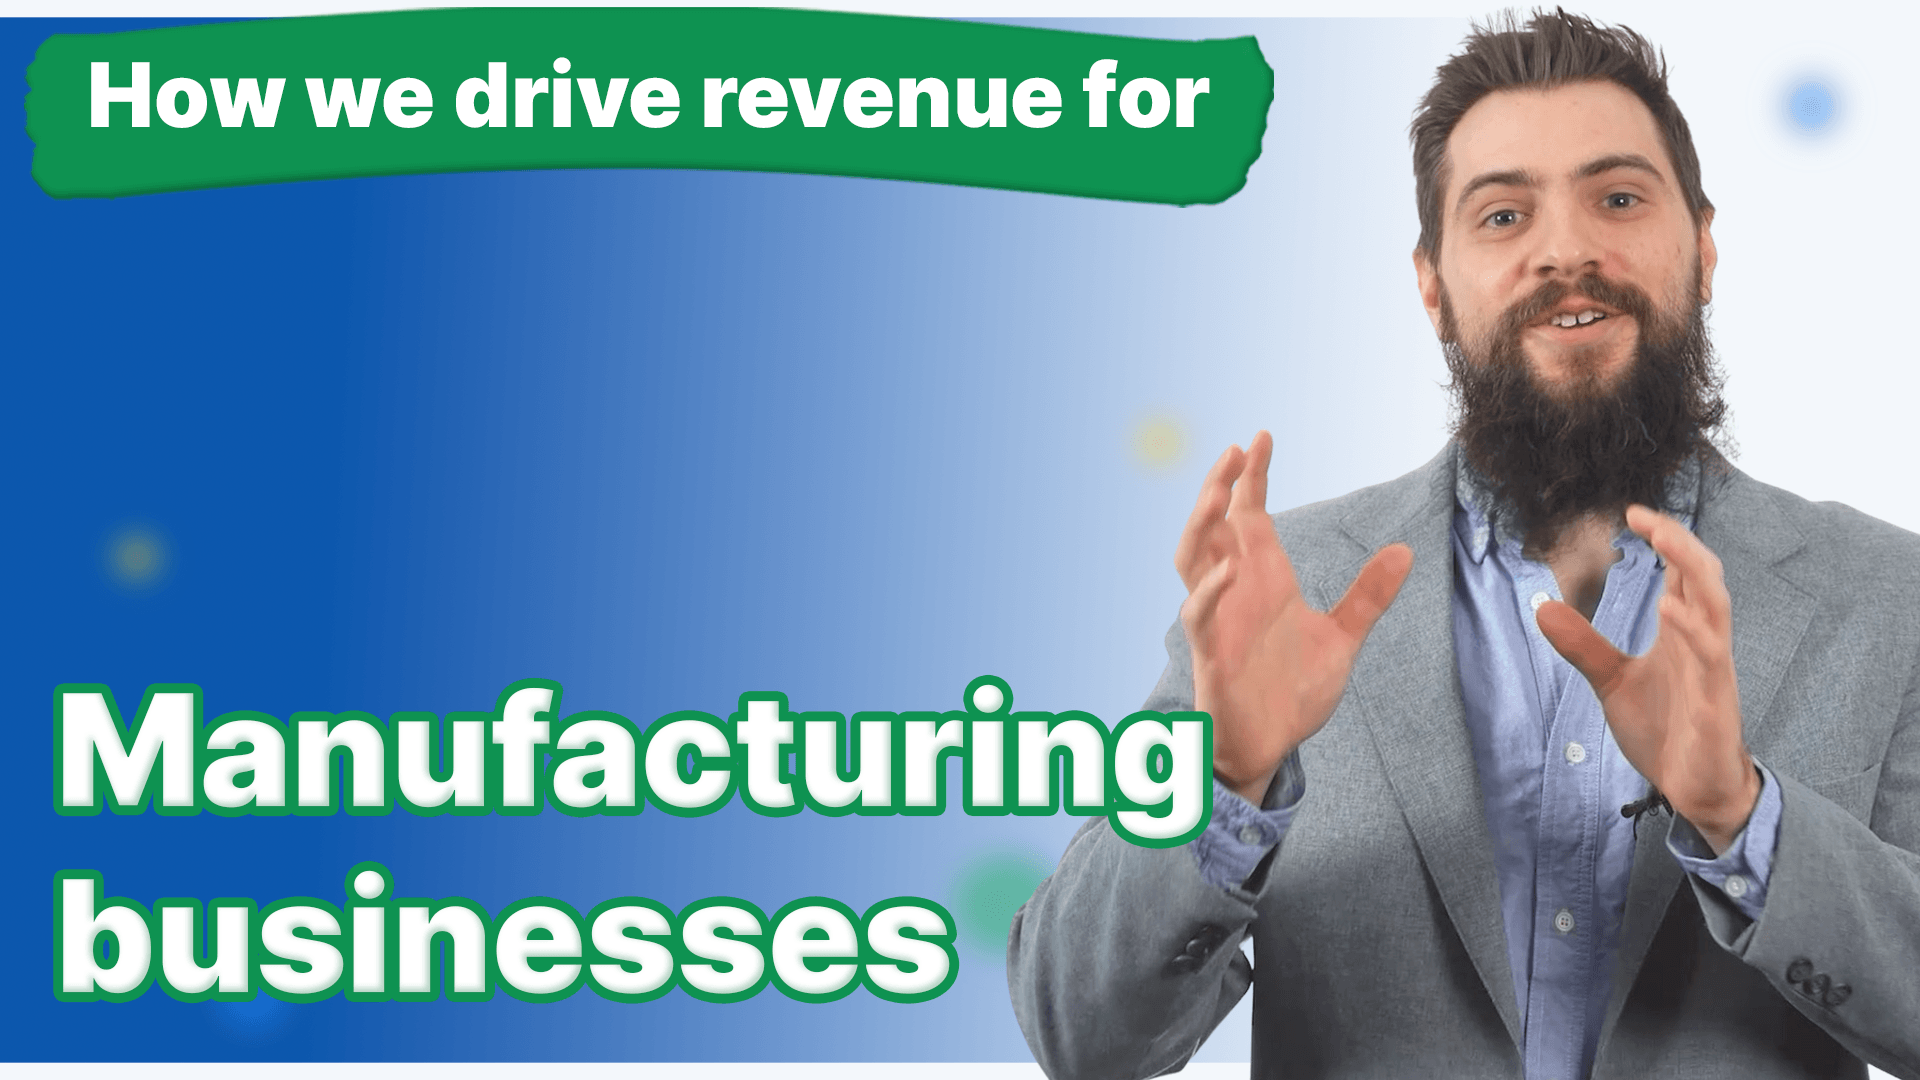 How we drive revenue for manufacturing businesses thumbnail